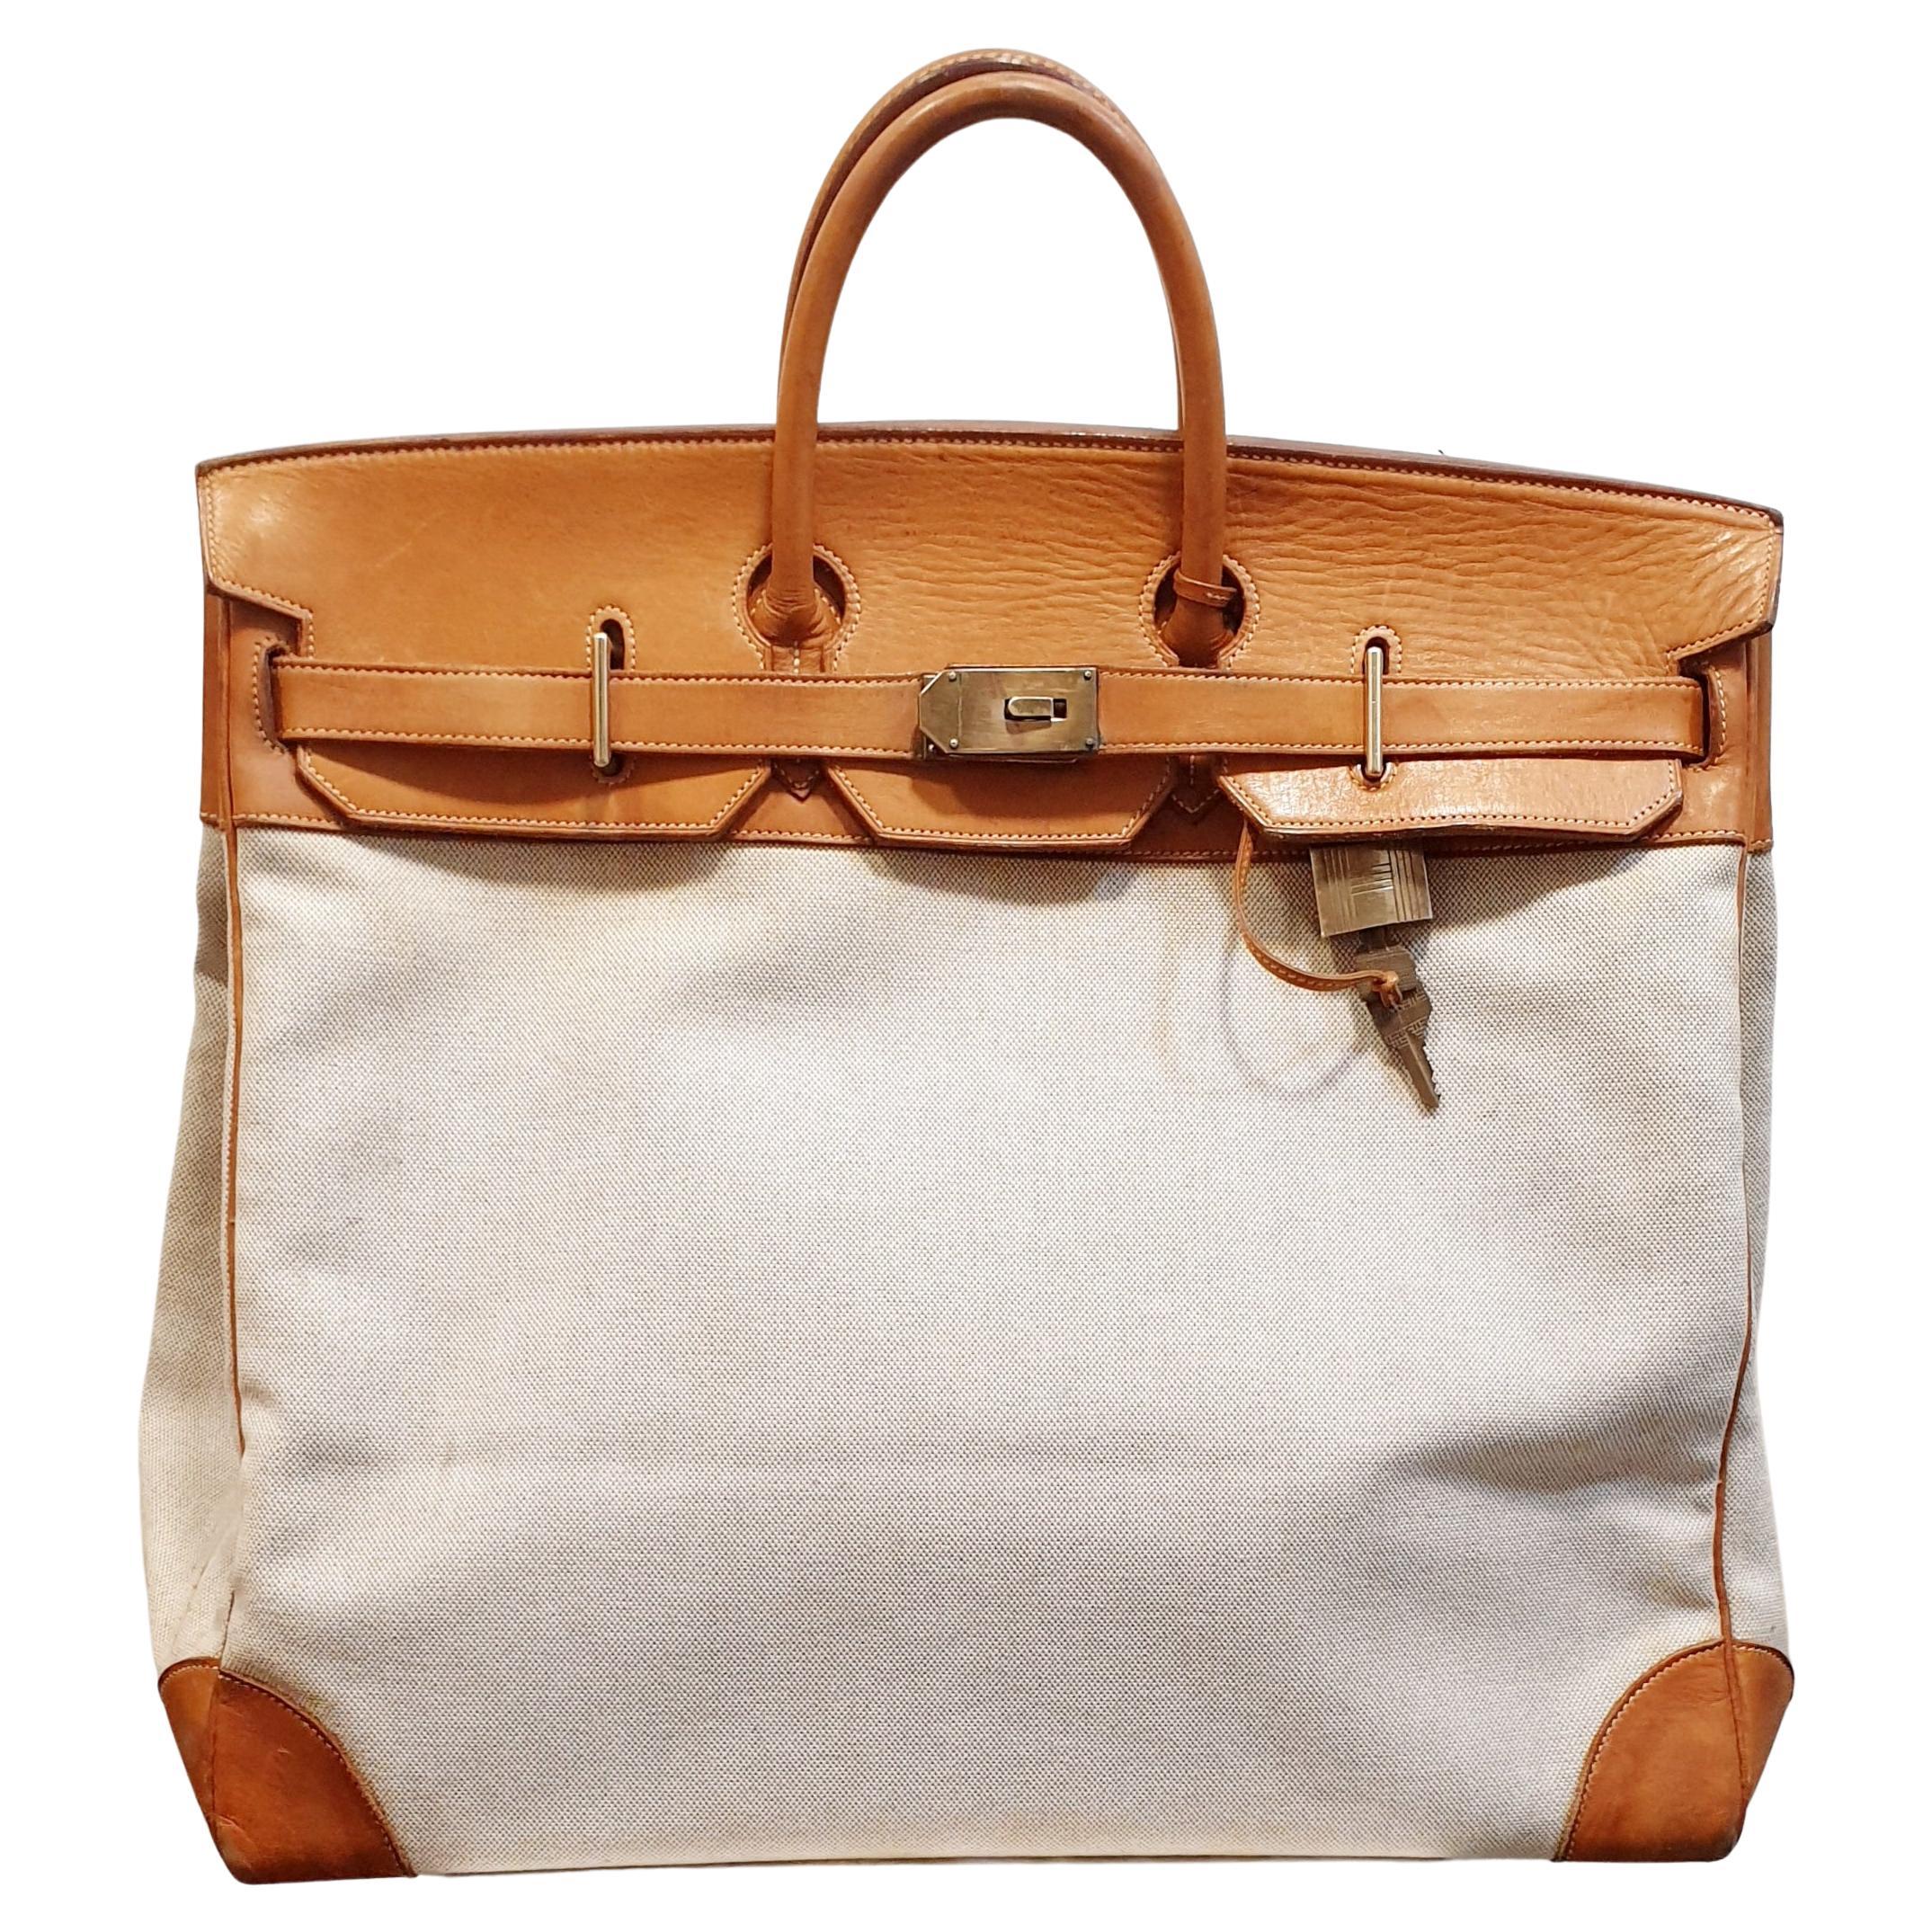  Hermes Haut à Courroies - Travel Bag in beige canvas and brown leather 1950´s 